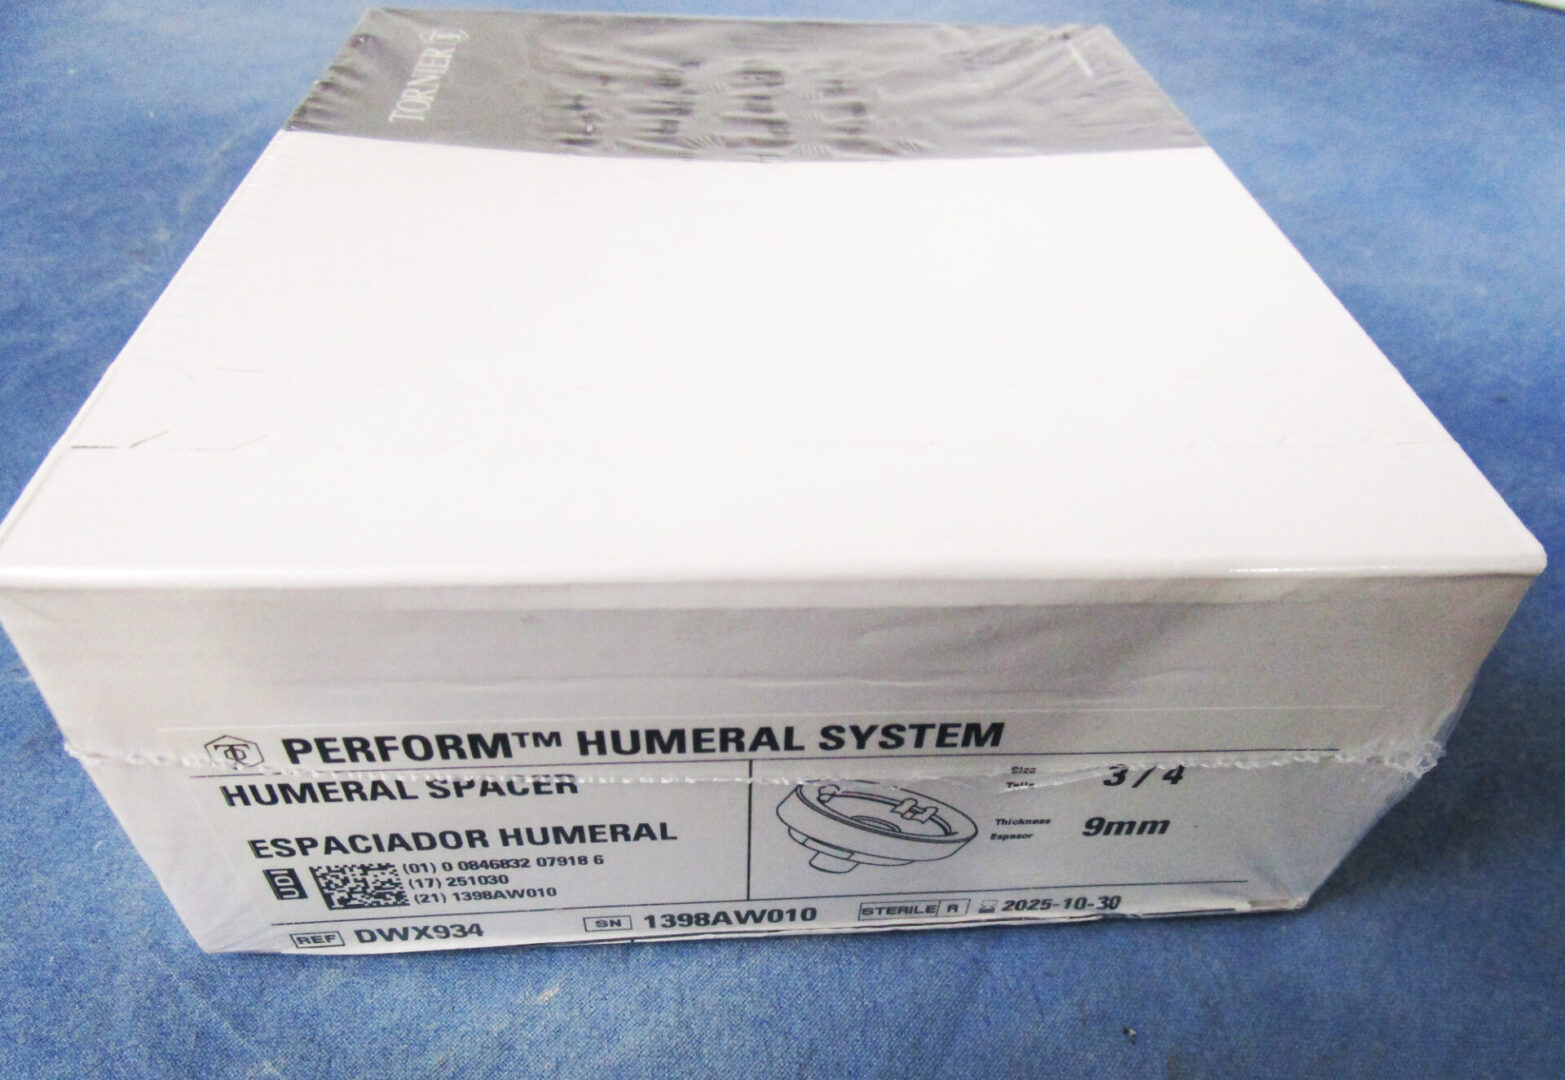 A box of a white paper with the words perform humeral system on it.